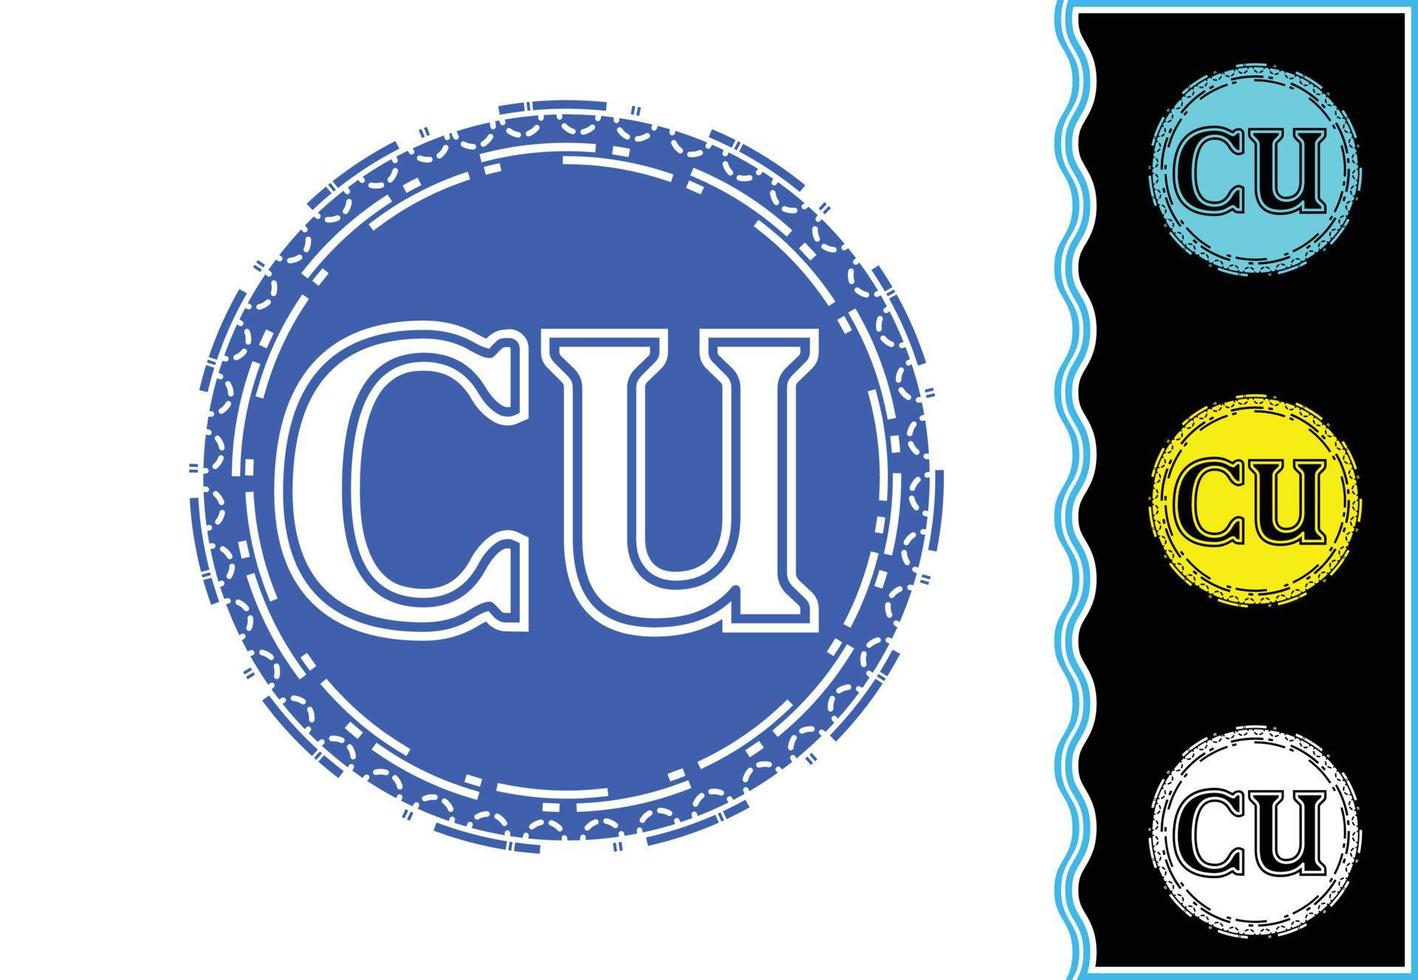 CU letter new logo and icon design template vector